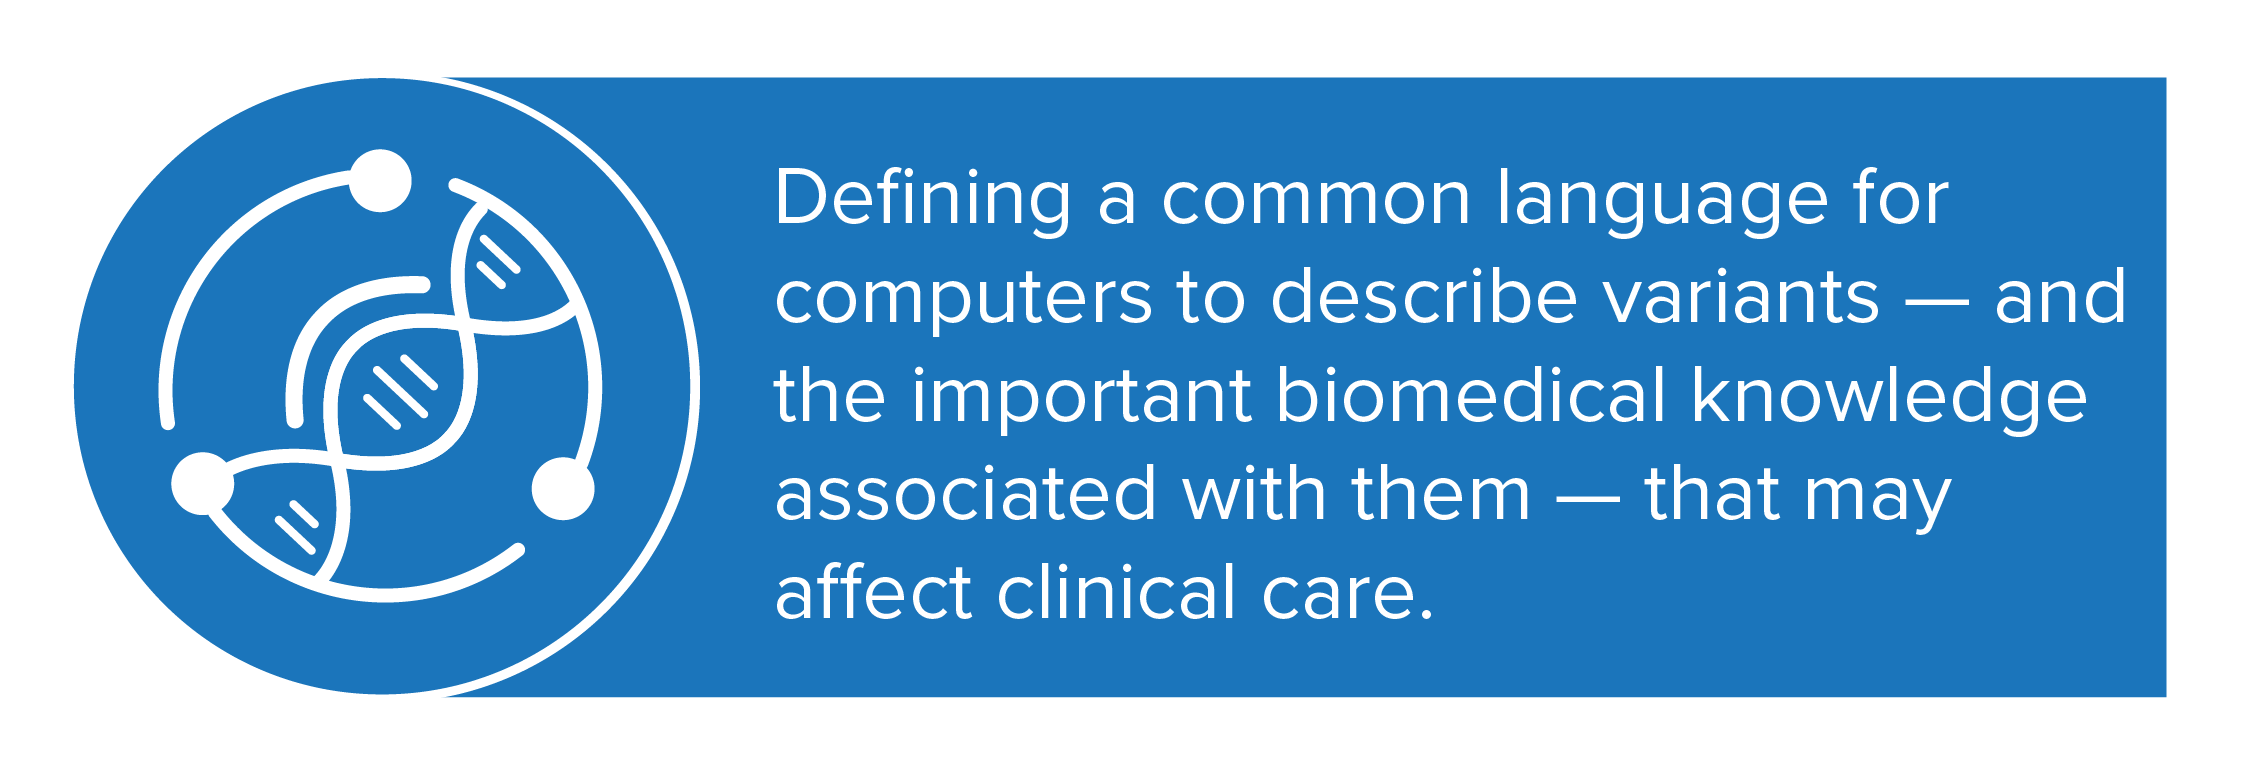 The GKS Work Stream is defining a common language for computers to describe variants — and the important biomedical knowledge associated with them — that may affect clinical care.